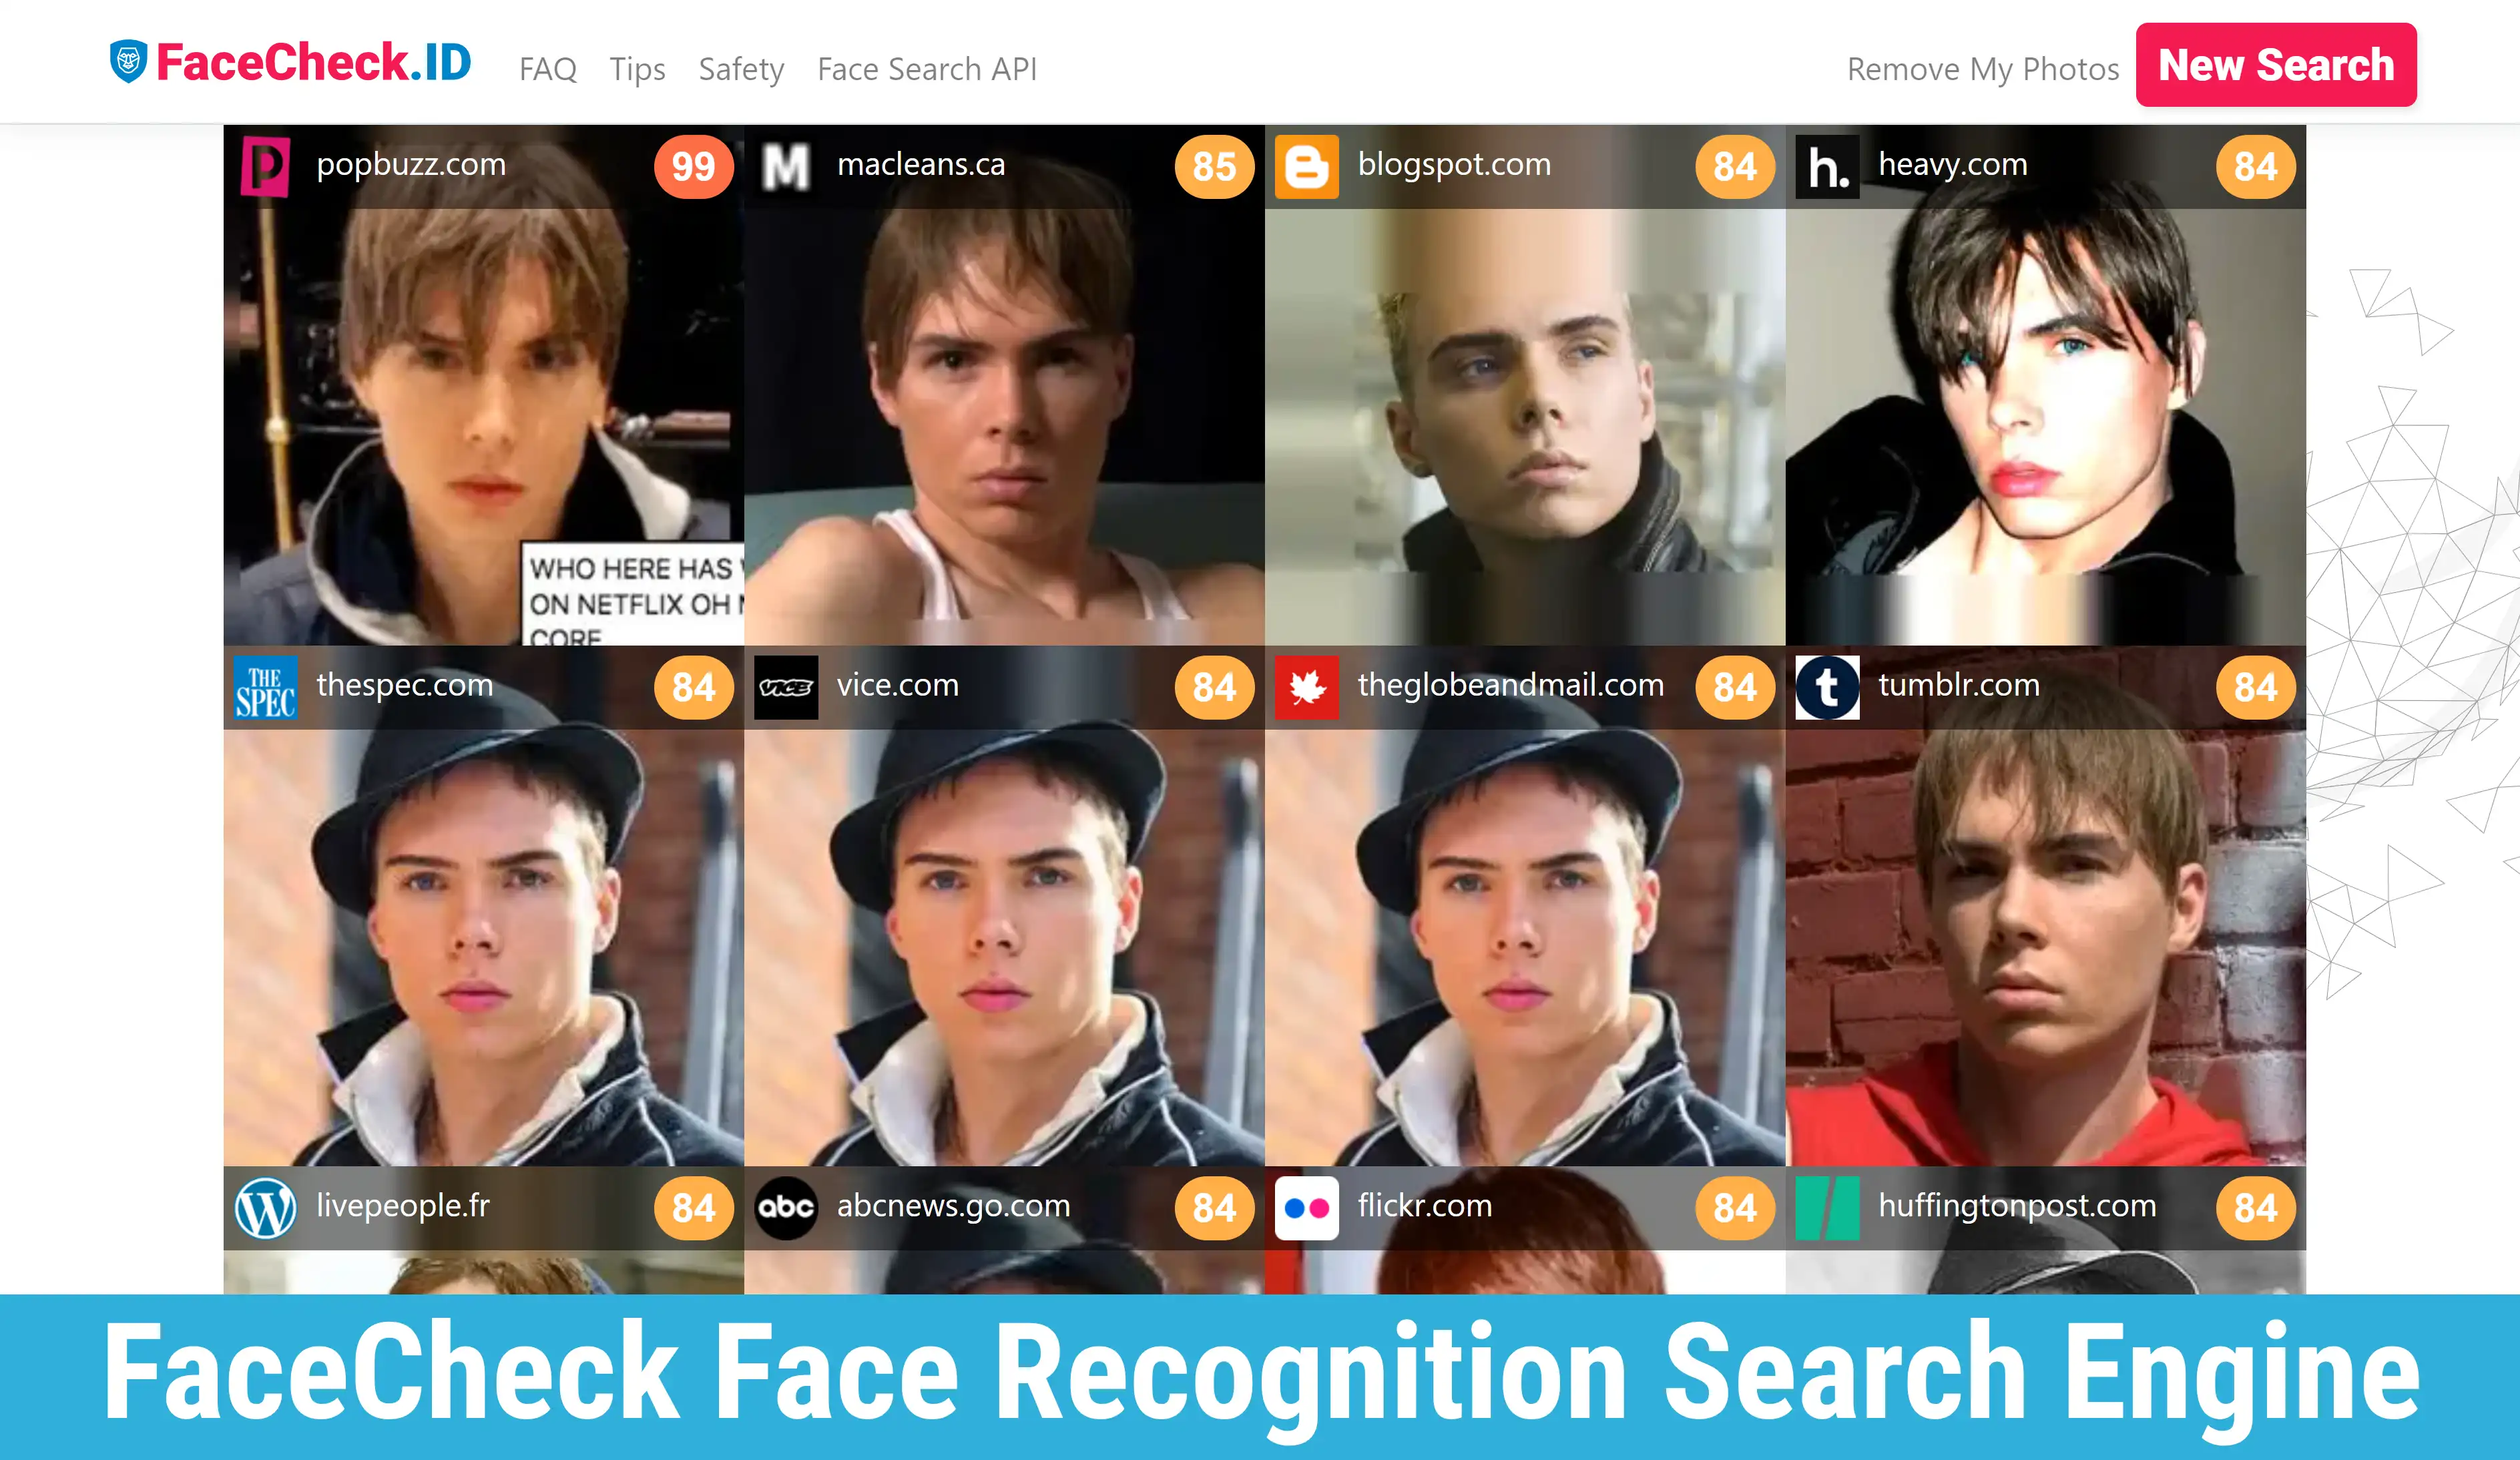 FaceCheck.ID face search